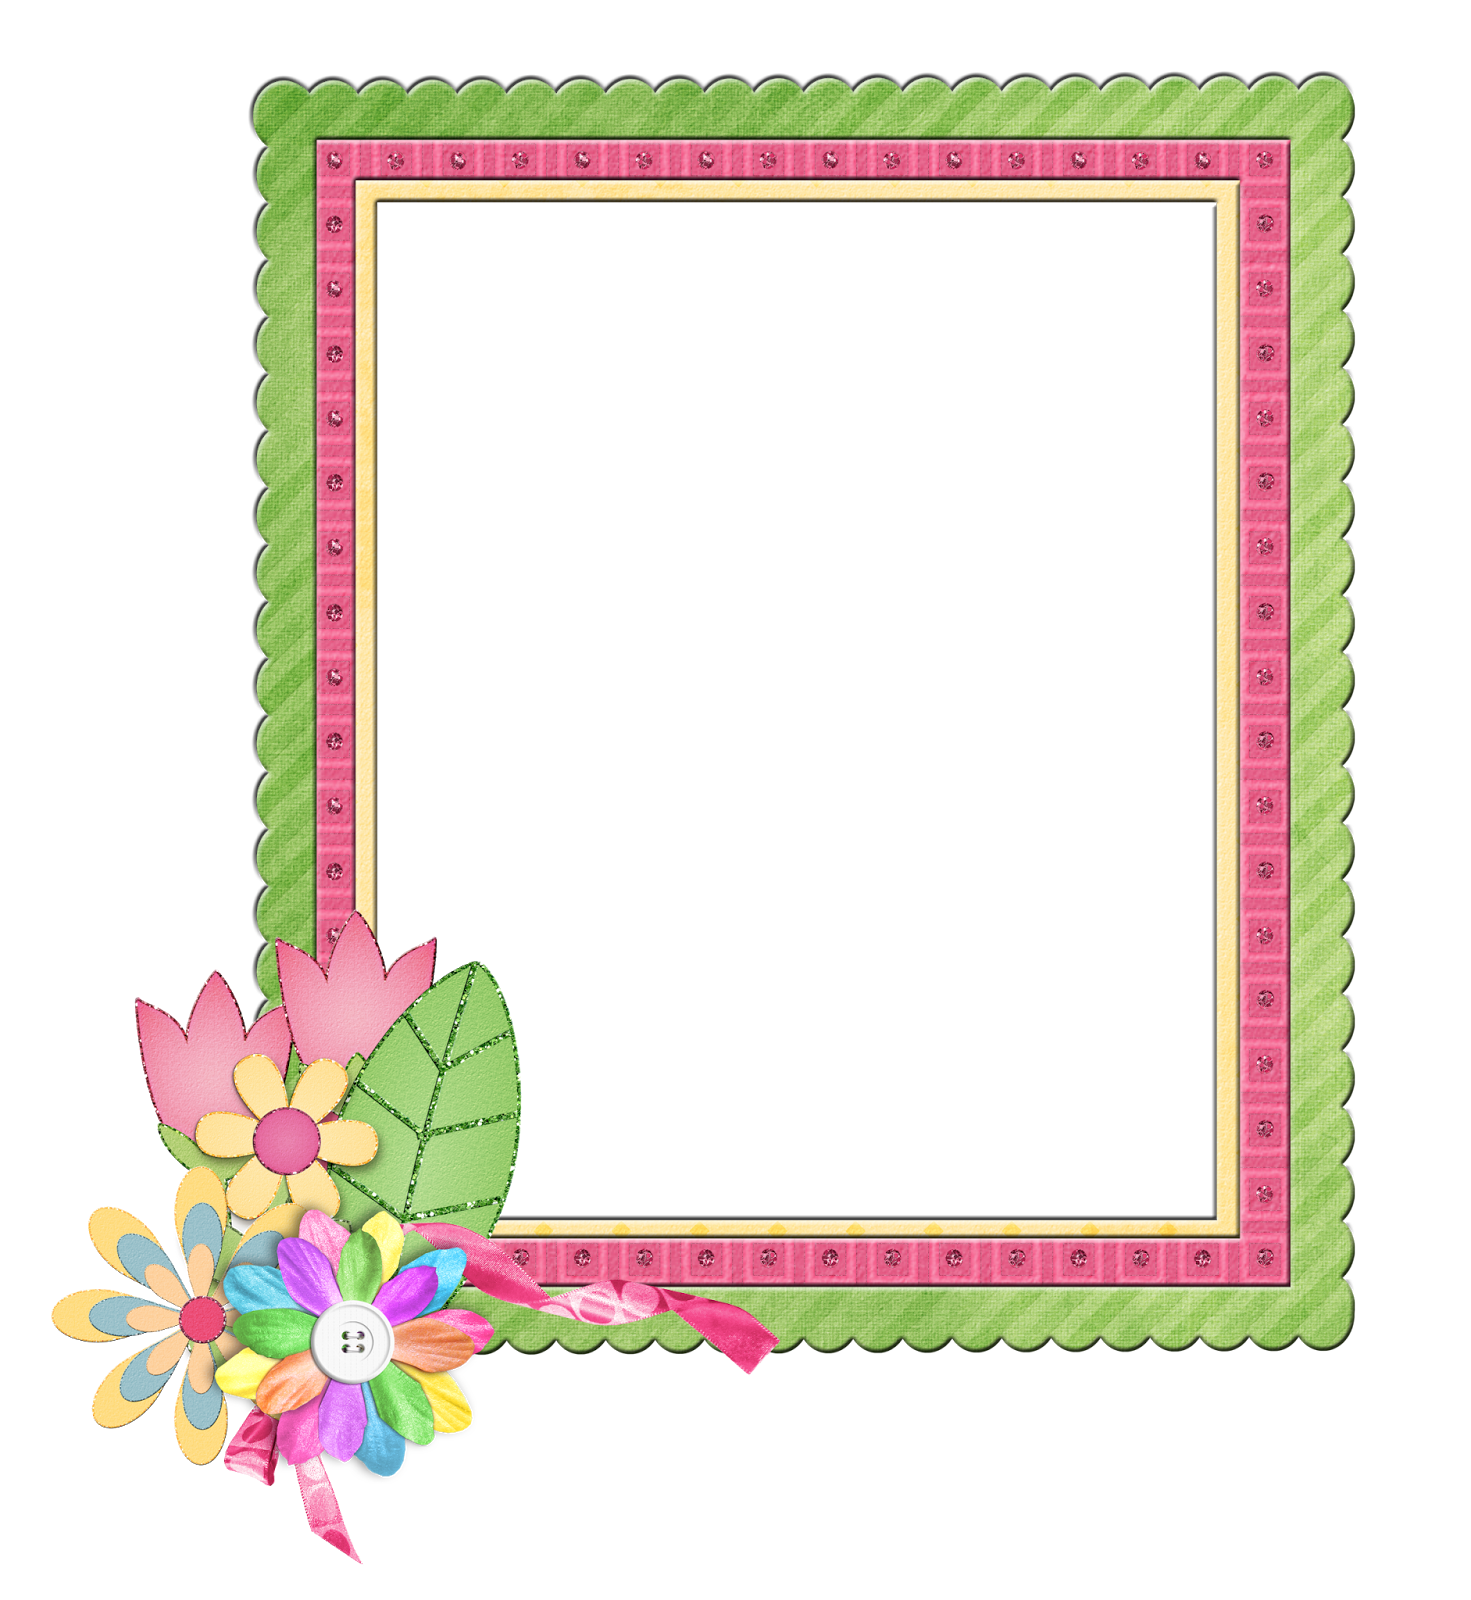 Nice Flowers Free Printable Frames Or Cards Oh My Fiesta In English